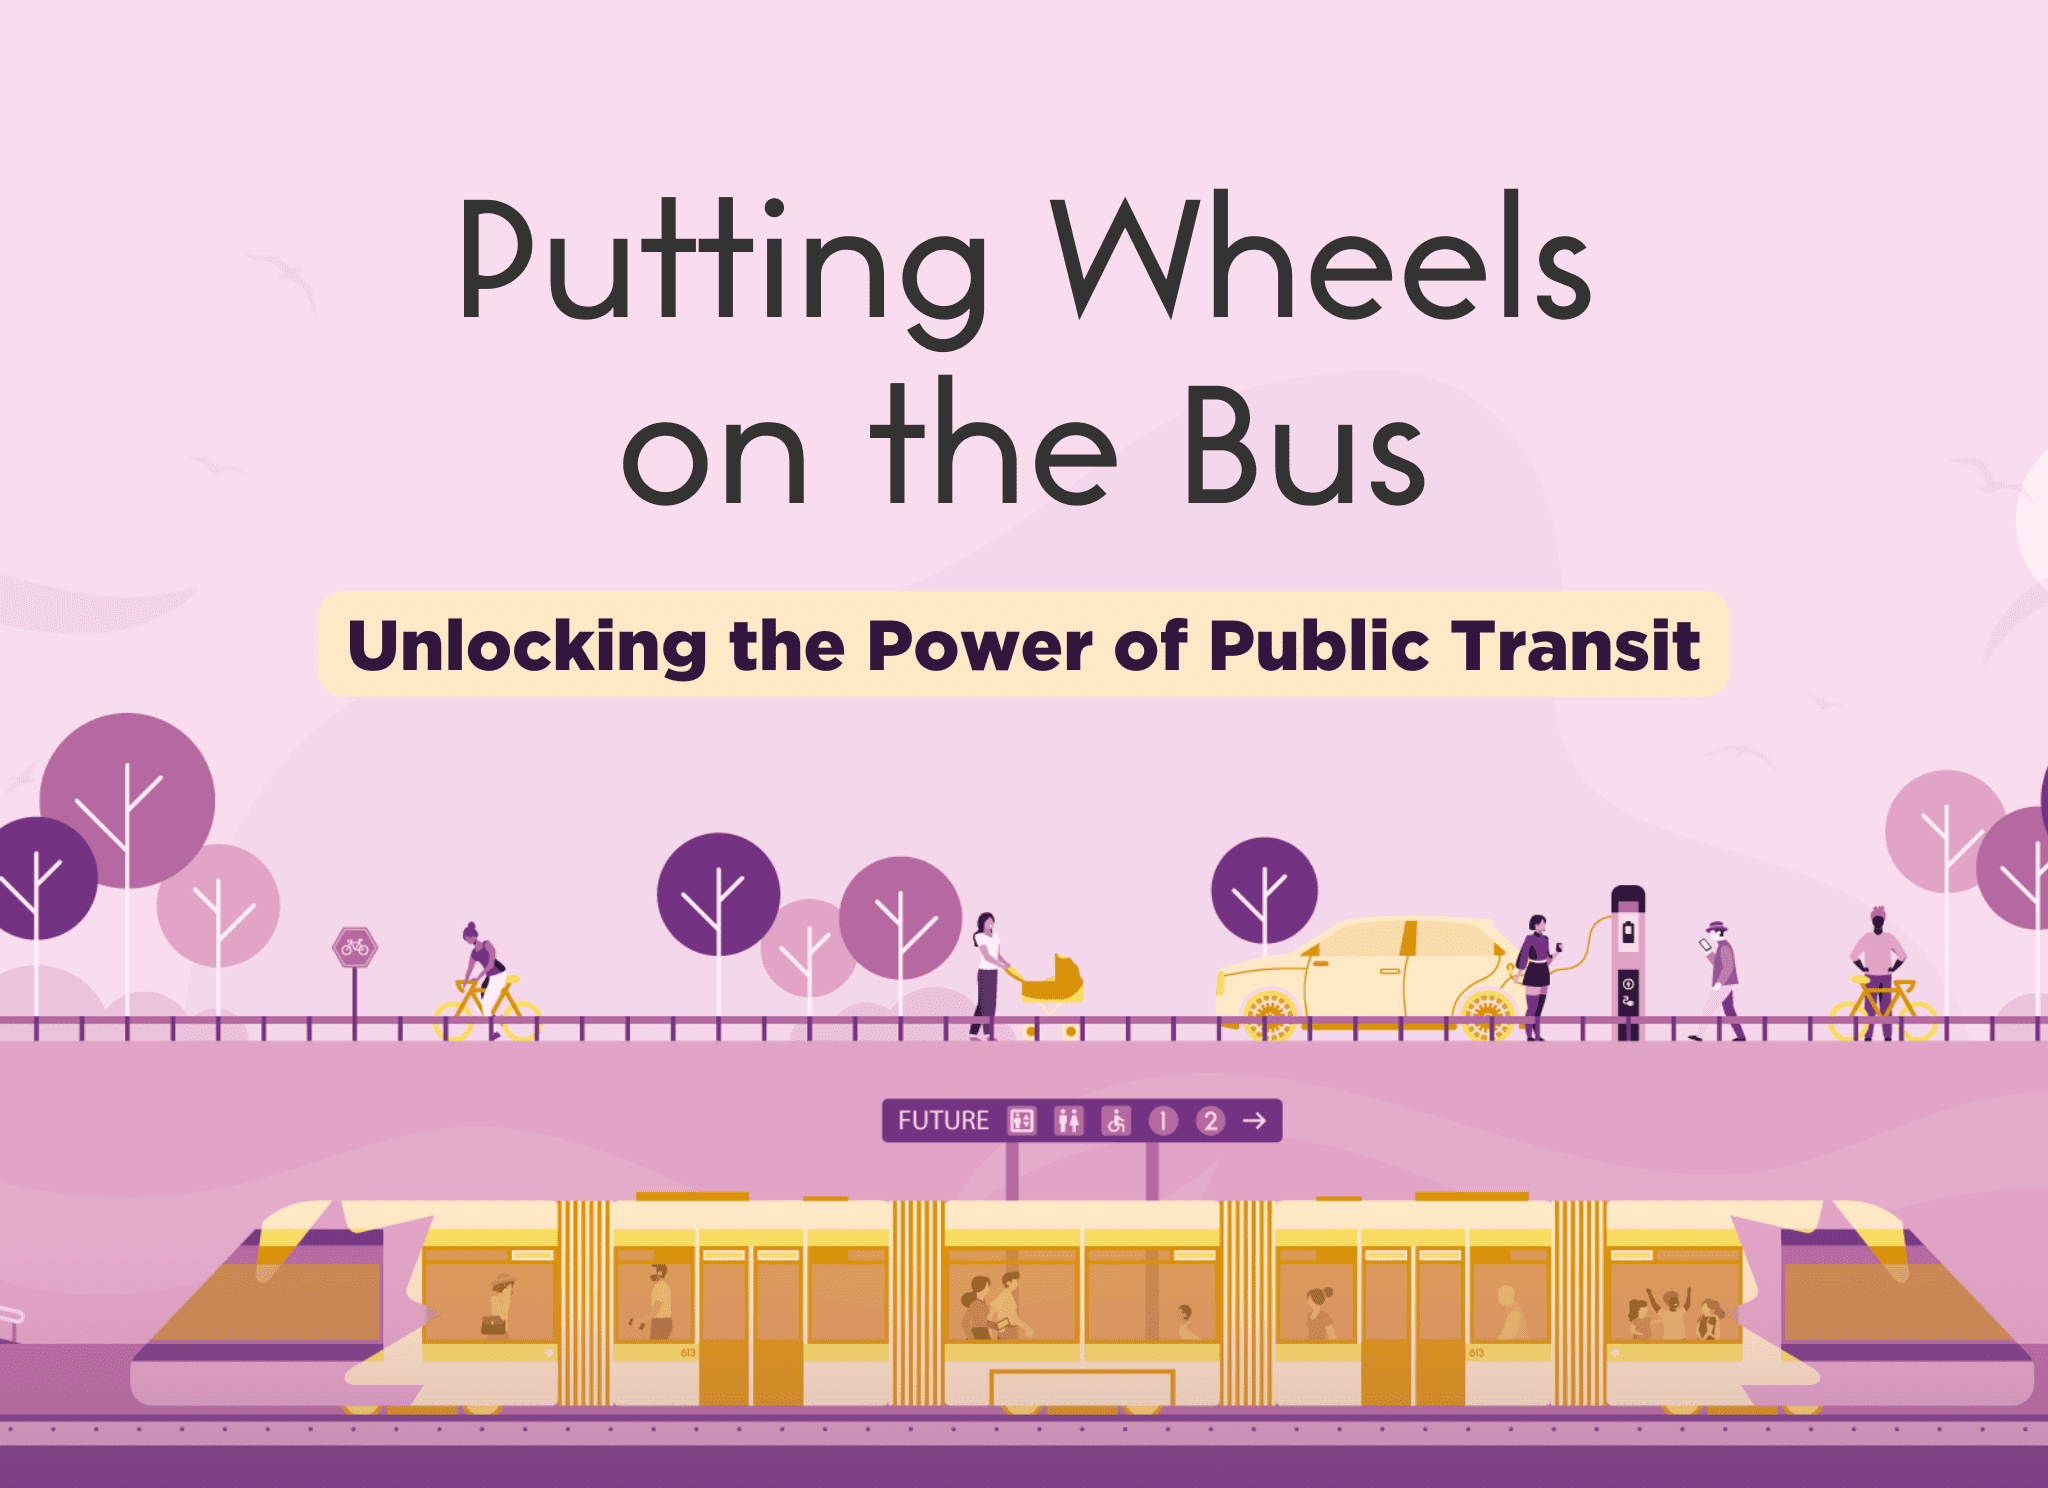 Text reads "putting wheels on the bus" under which "Unlocking the power of public transit" illustration of a train and people waiting at a station